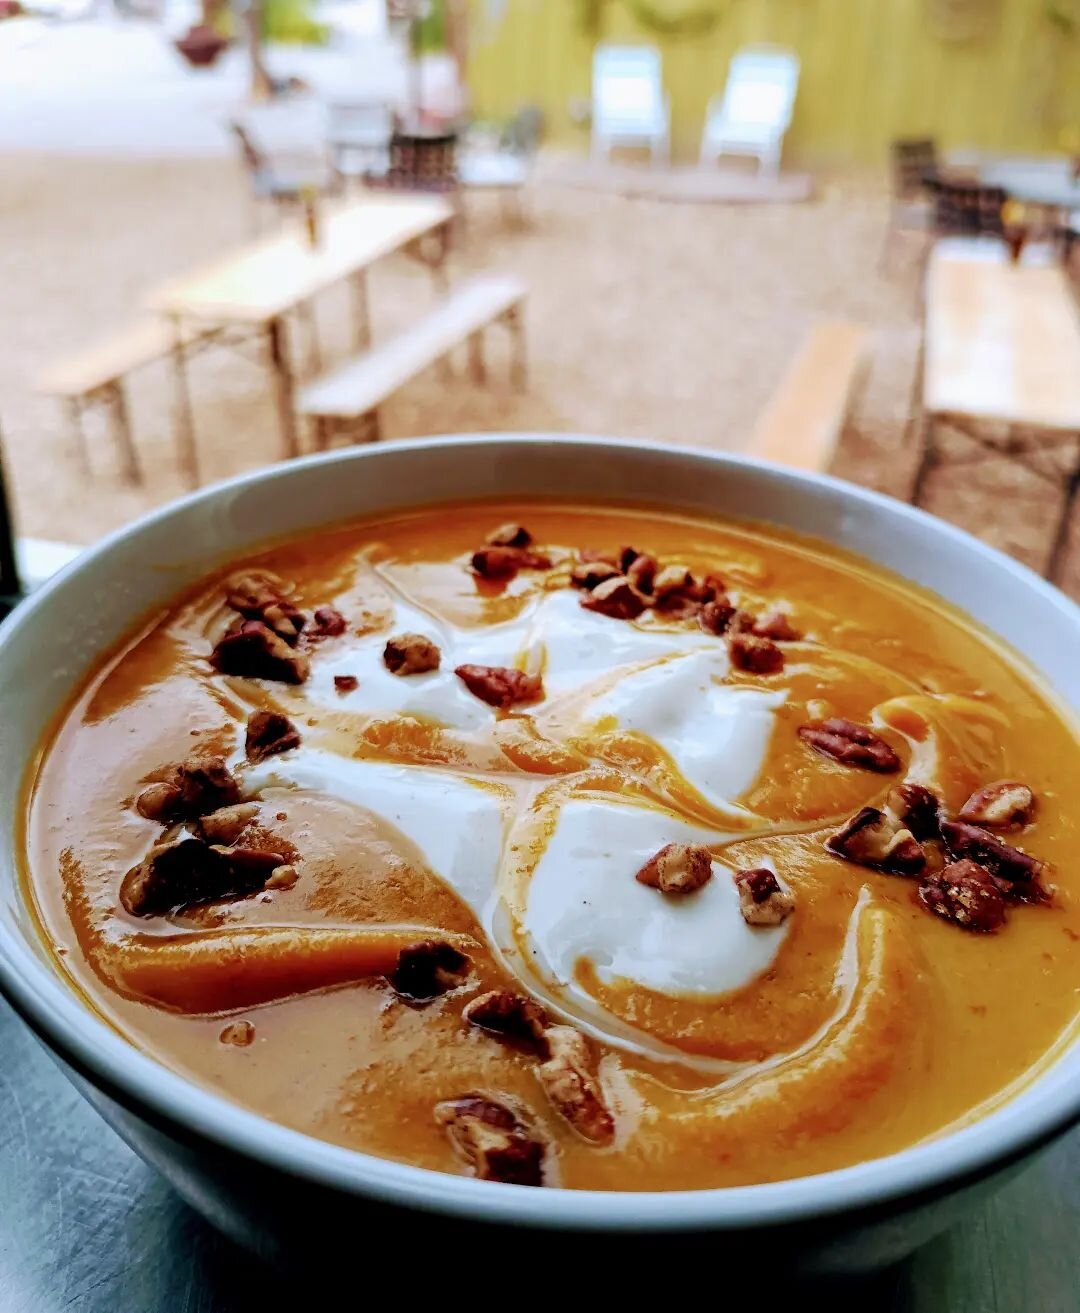 Creamy Dreamy Warming Pumpkin Soup this weekend because it's our first chilly day in Moab.
Swing by to get some or see us at @wabisabi.moab Fall Festival 11-4 on Saturday

#autumn #vegan #plantbased #moabutah #archesnationalpark #cayonlandsnationalpa